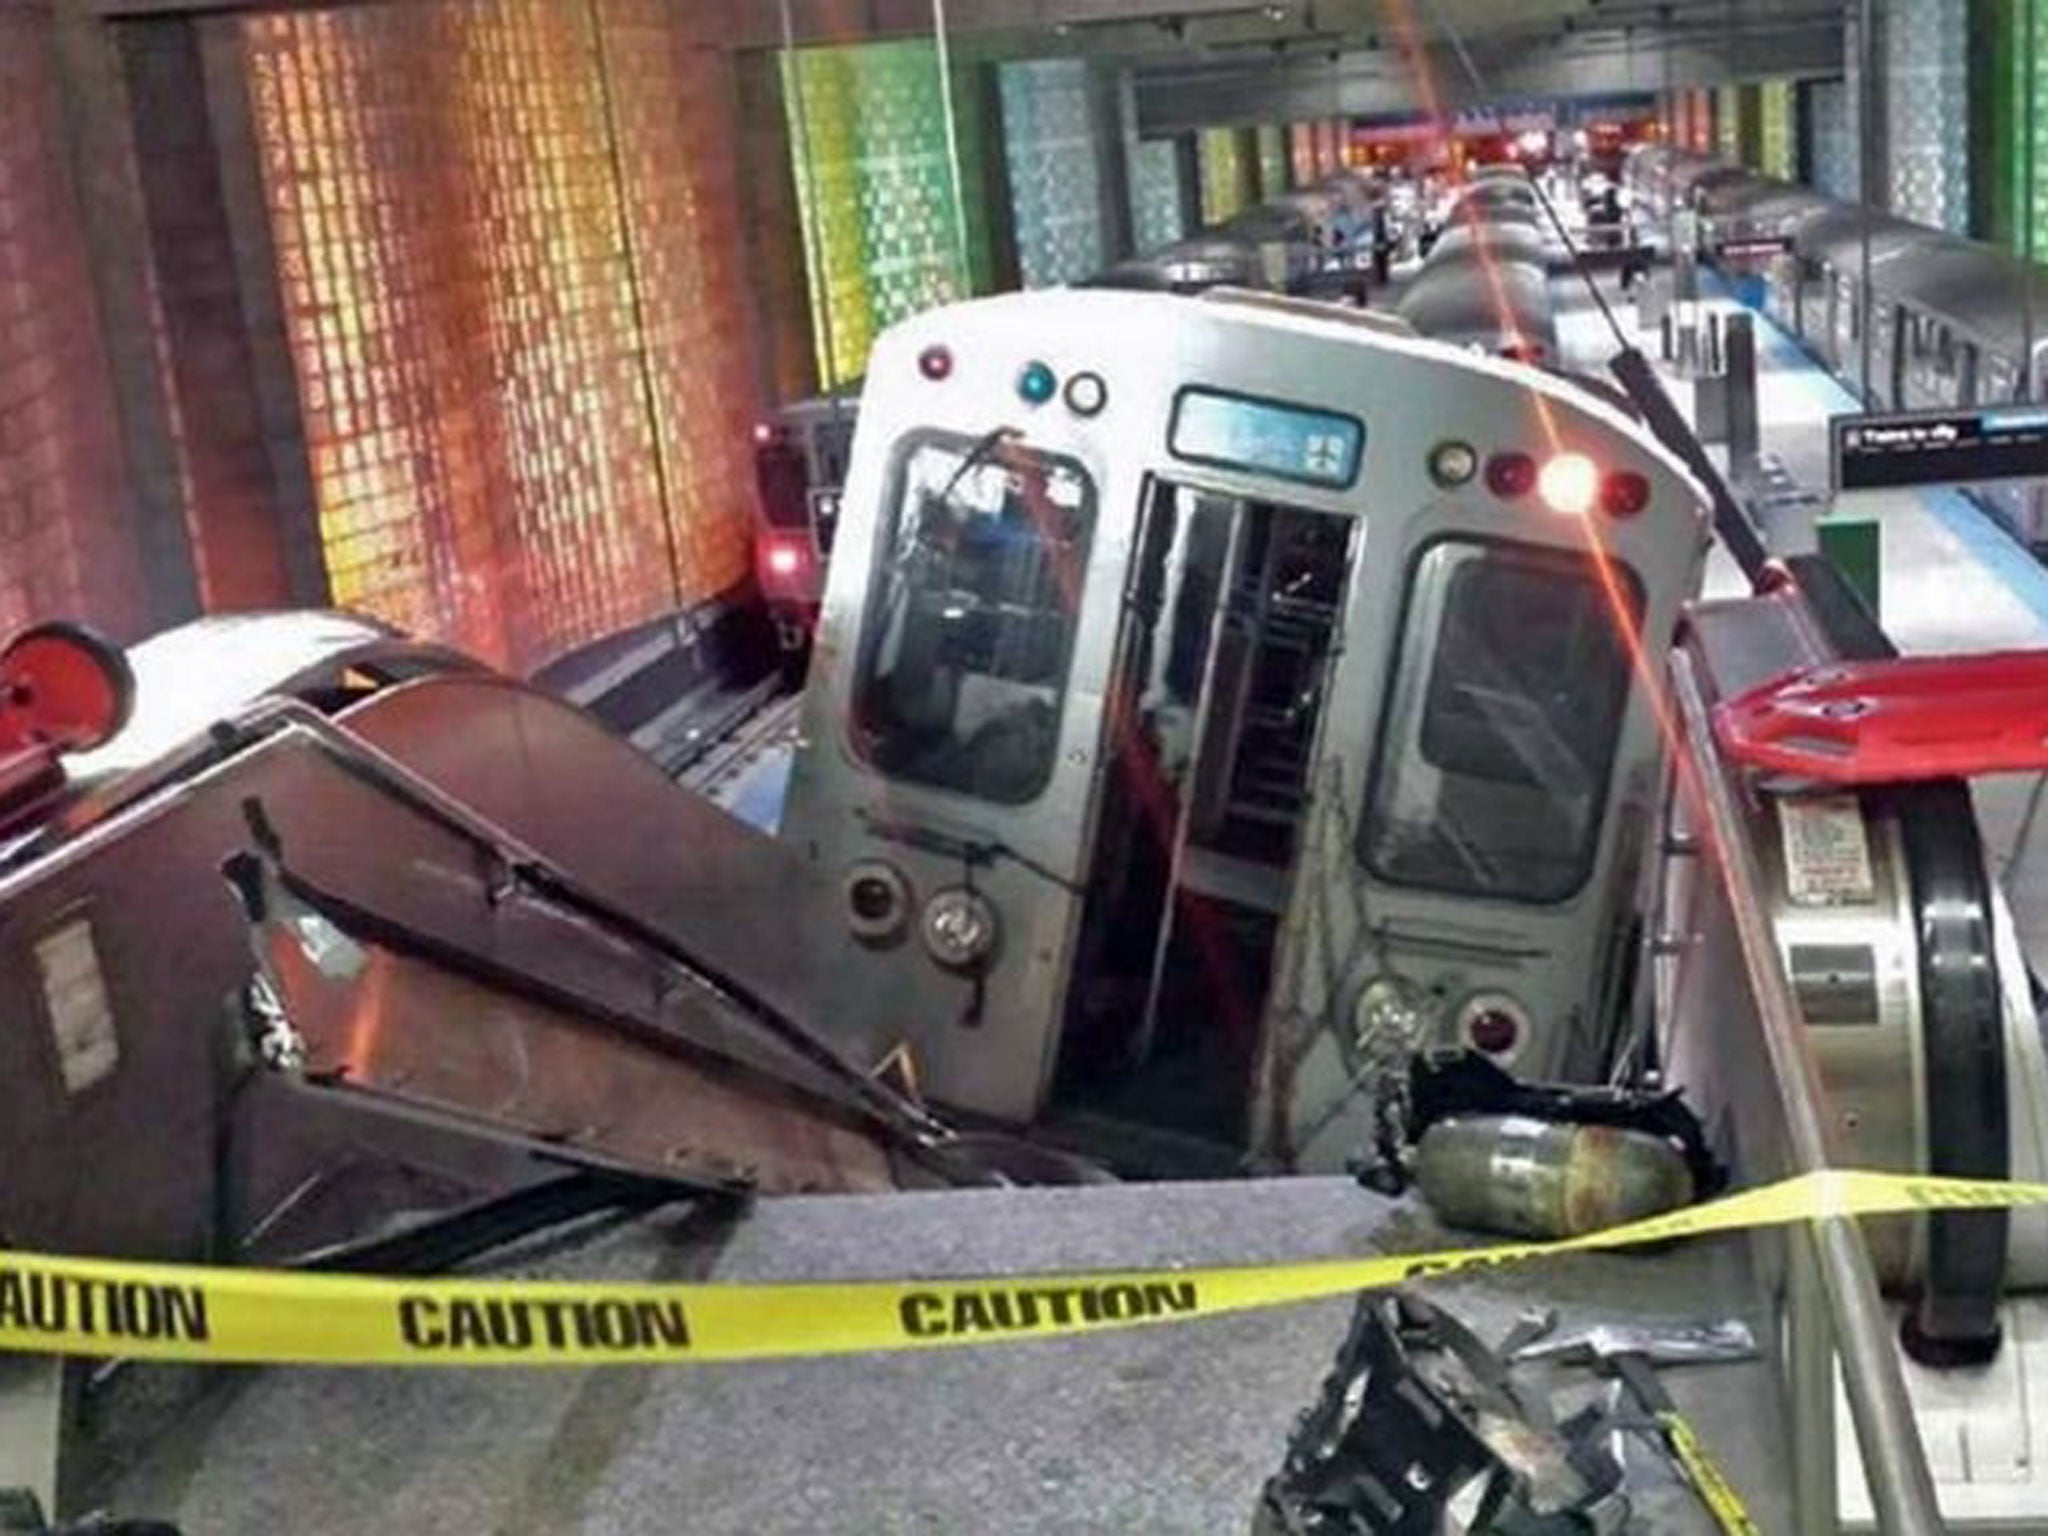 A Chicago Transit Authority train car rests on an escalator at the O'Hare Airport station after it derailed early Monday, March 24, 2014, in Chicago. More than 30 people were injured after the train "climbed over the last stop, jumped up on the sidewalk a